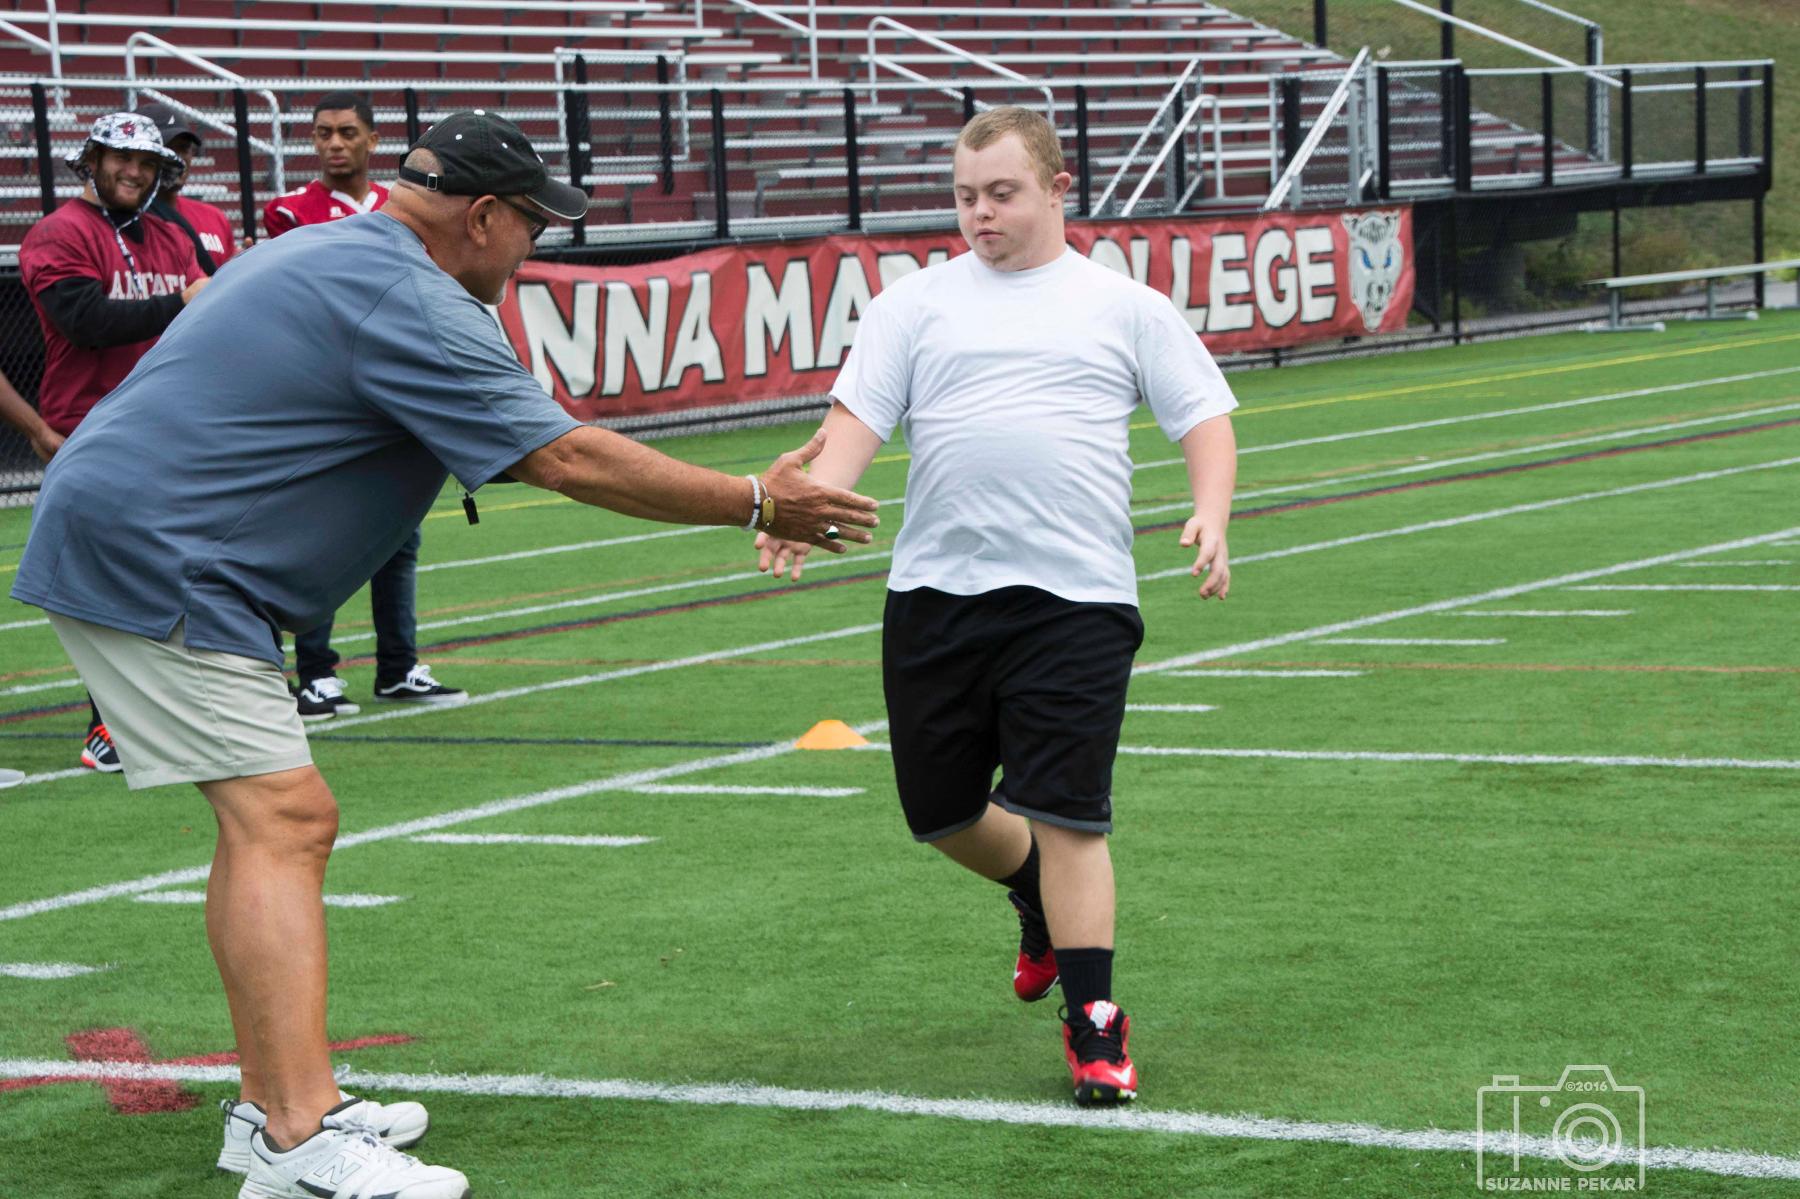 Football Hosts Special Olympics Teams from Seven Hills for Skills Clinic